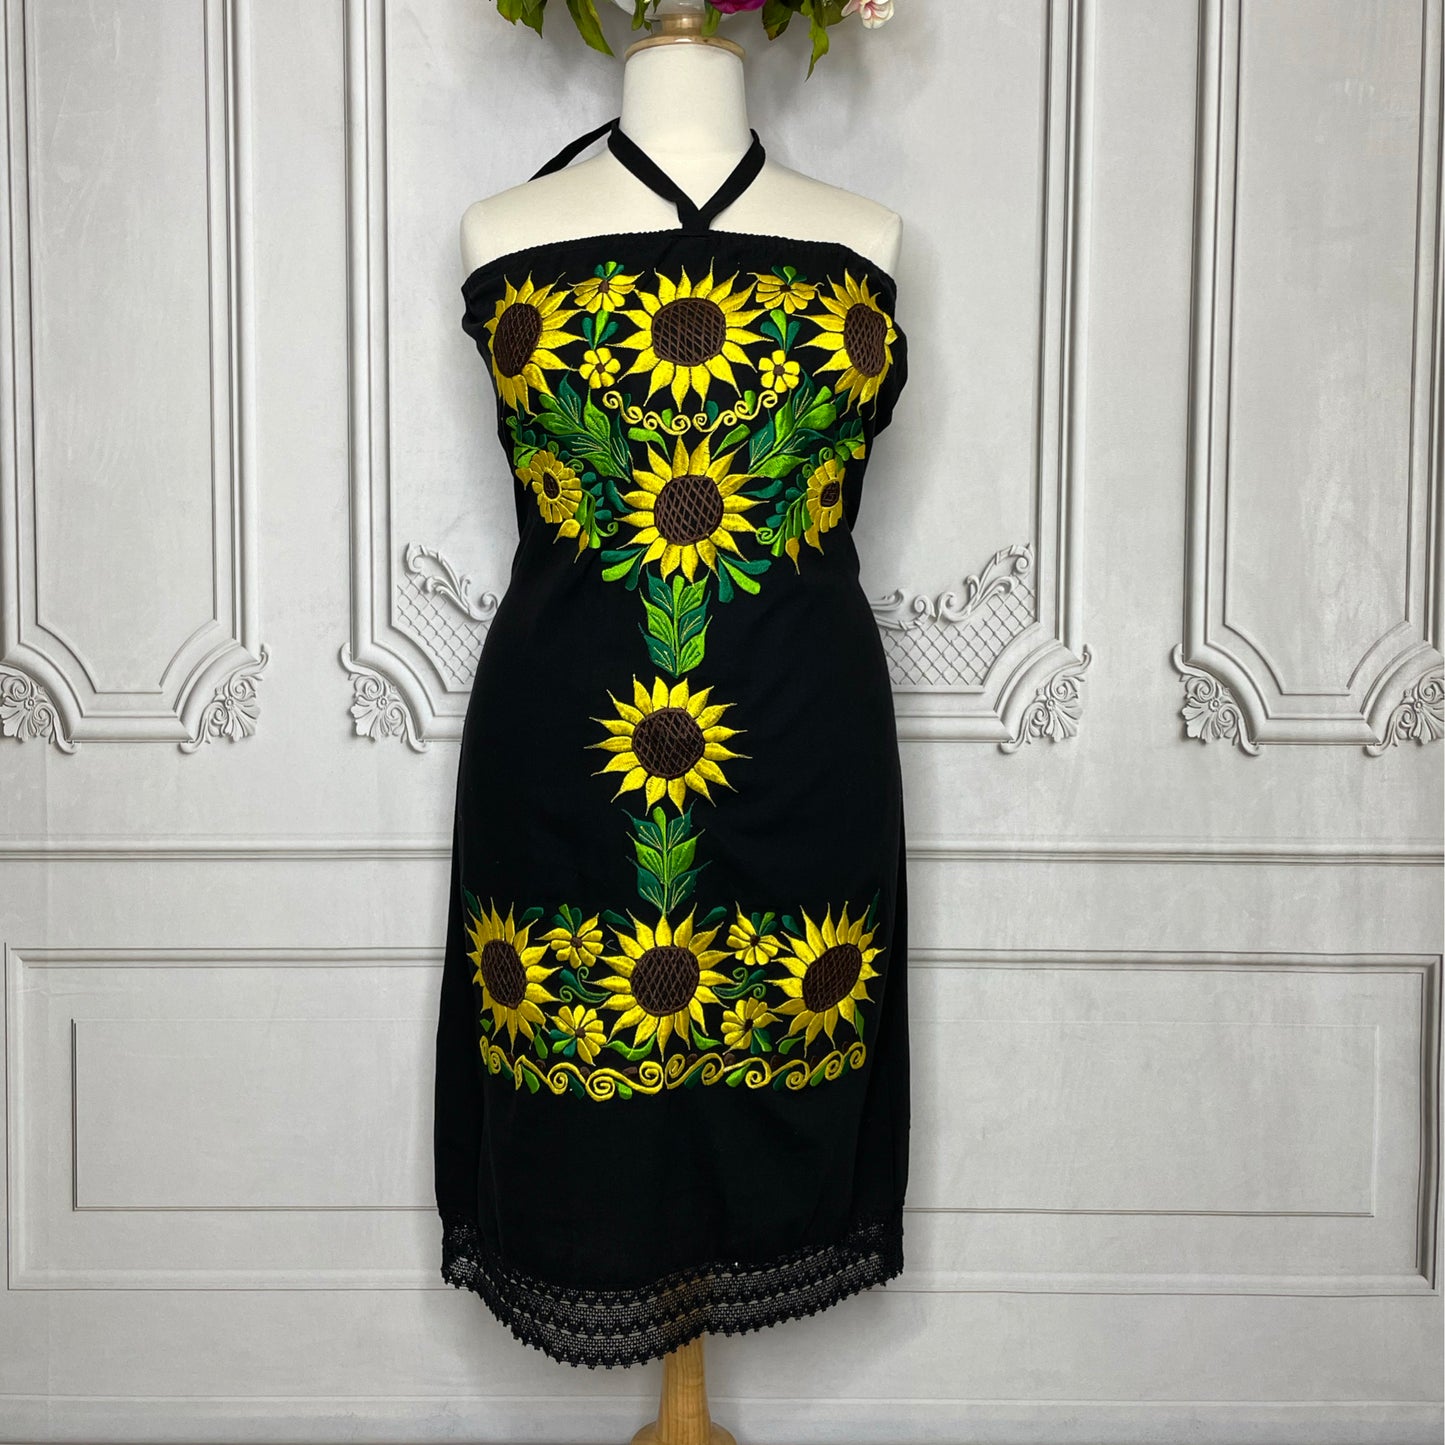 Mexican Halter Dress Sunflowers - Midi Lace